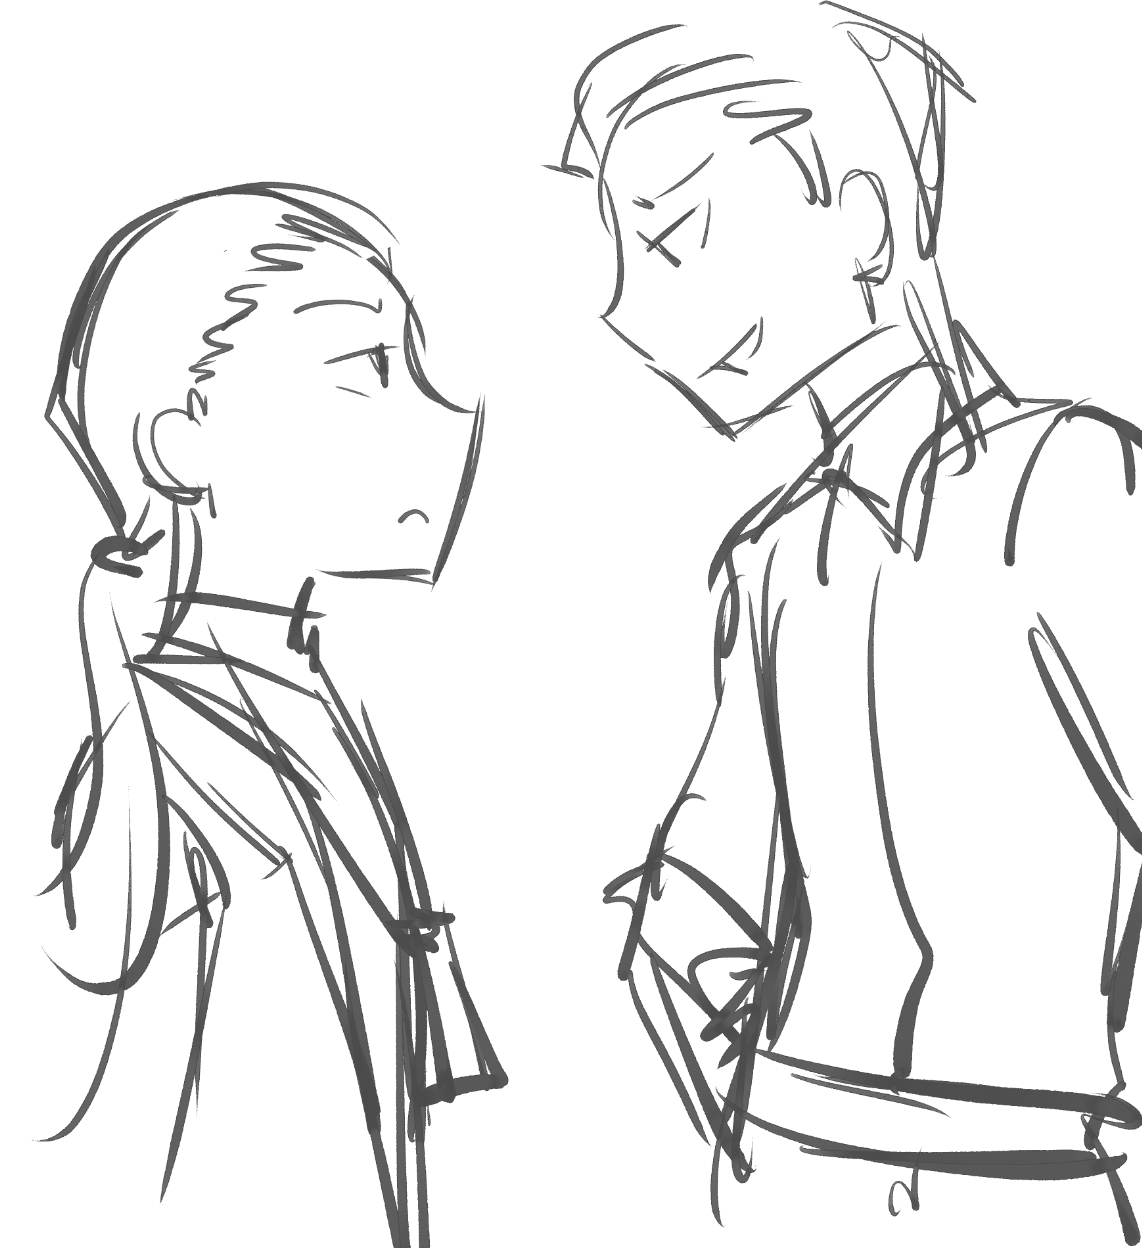 Smirking man and serious woman facing each other